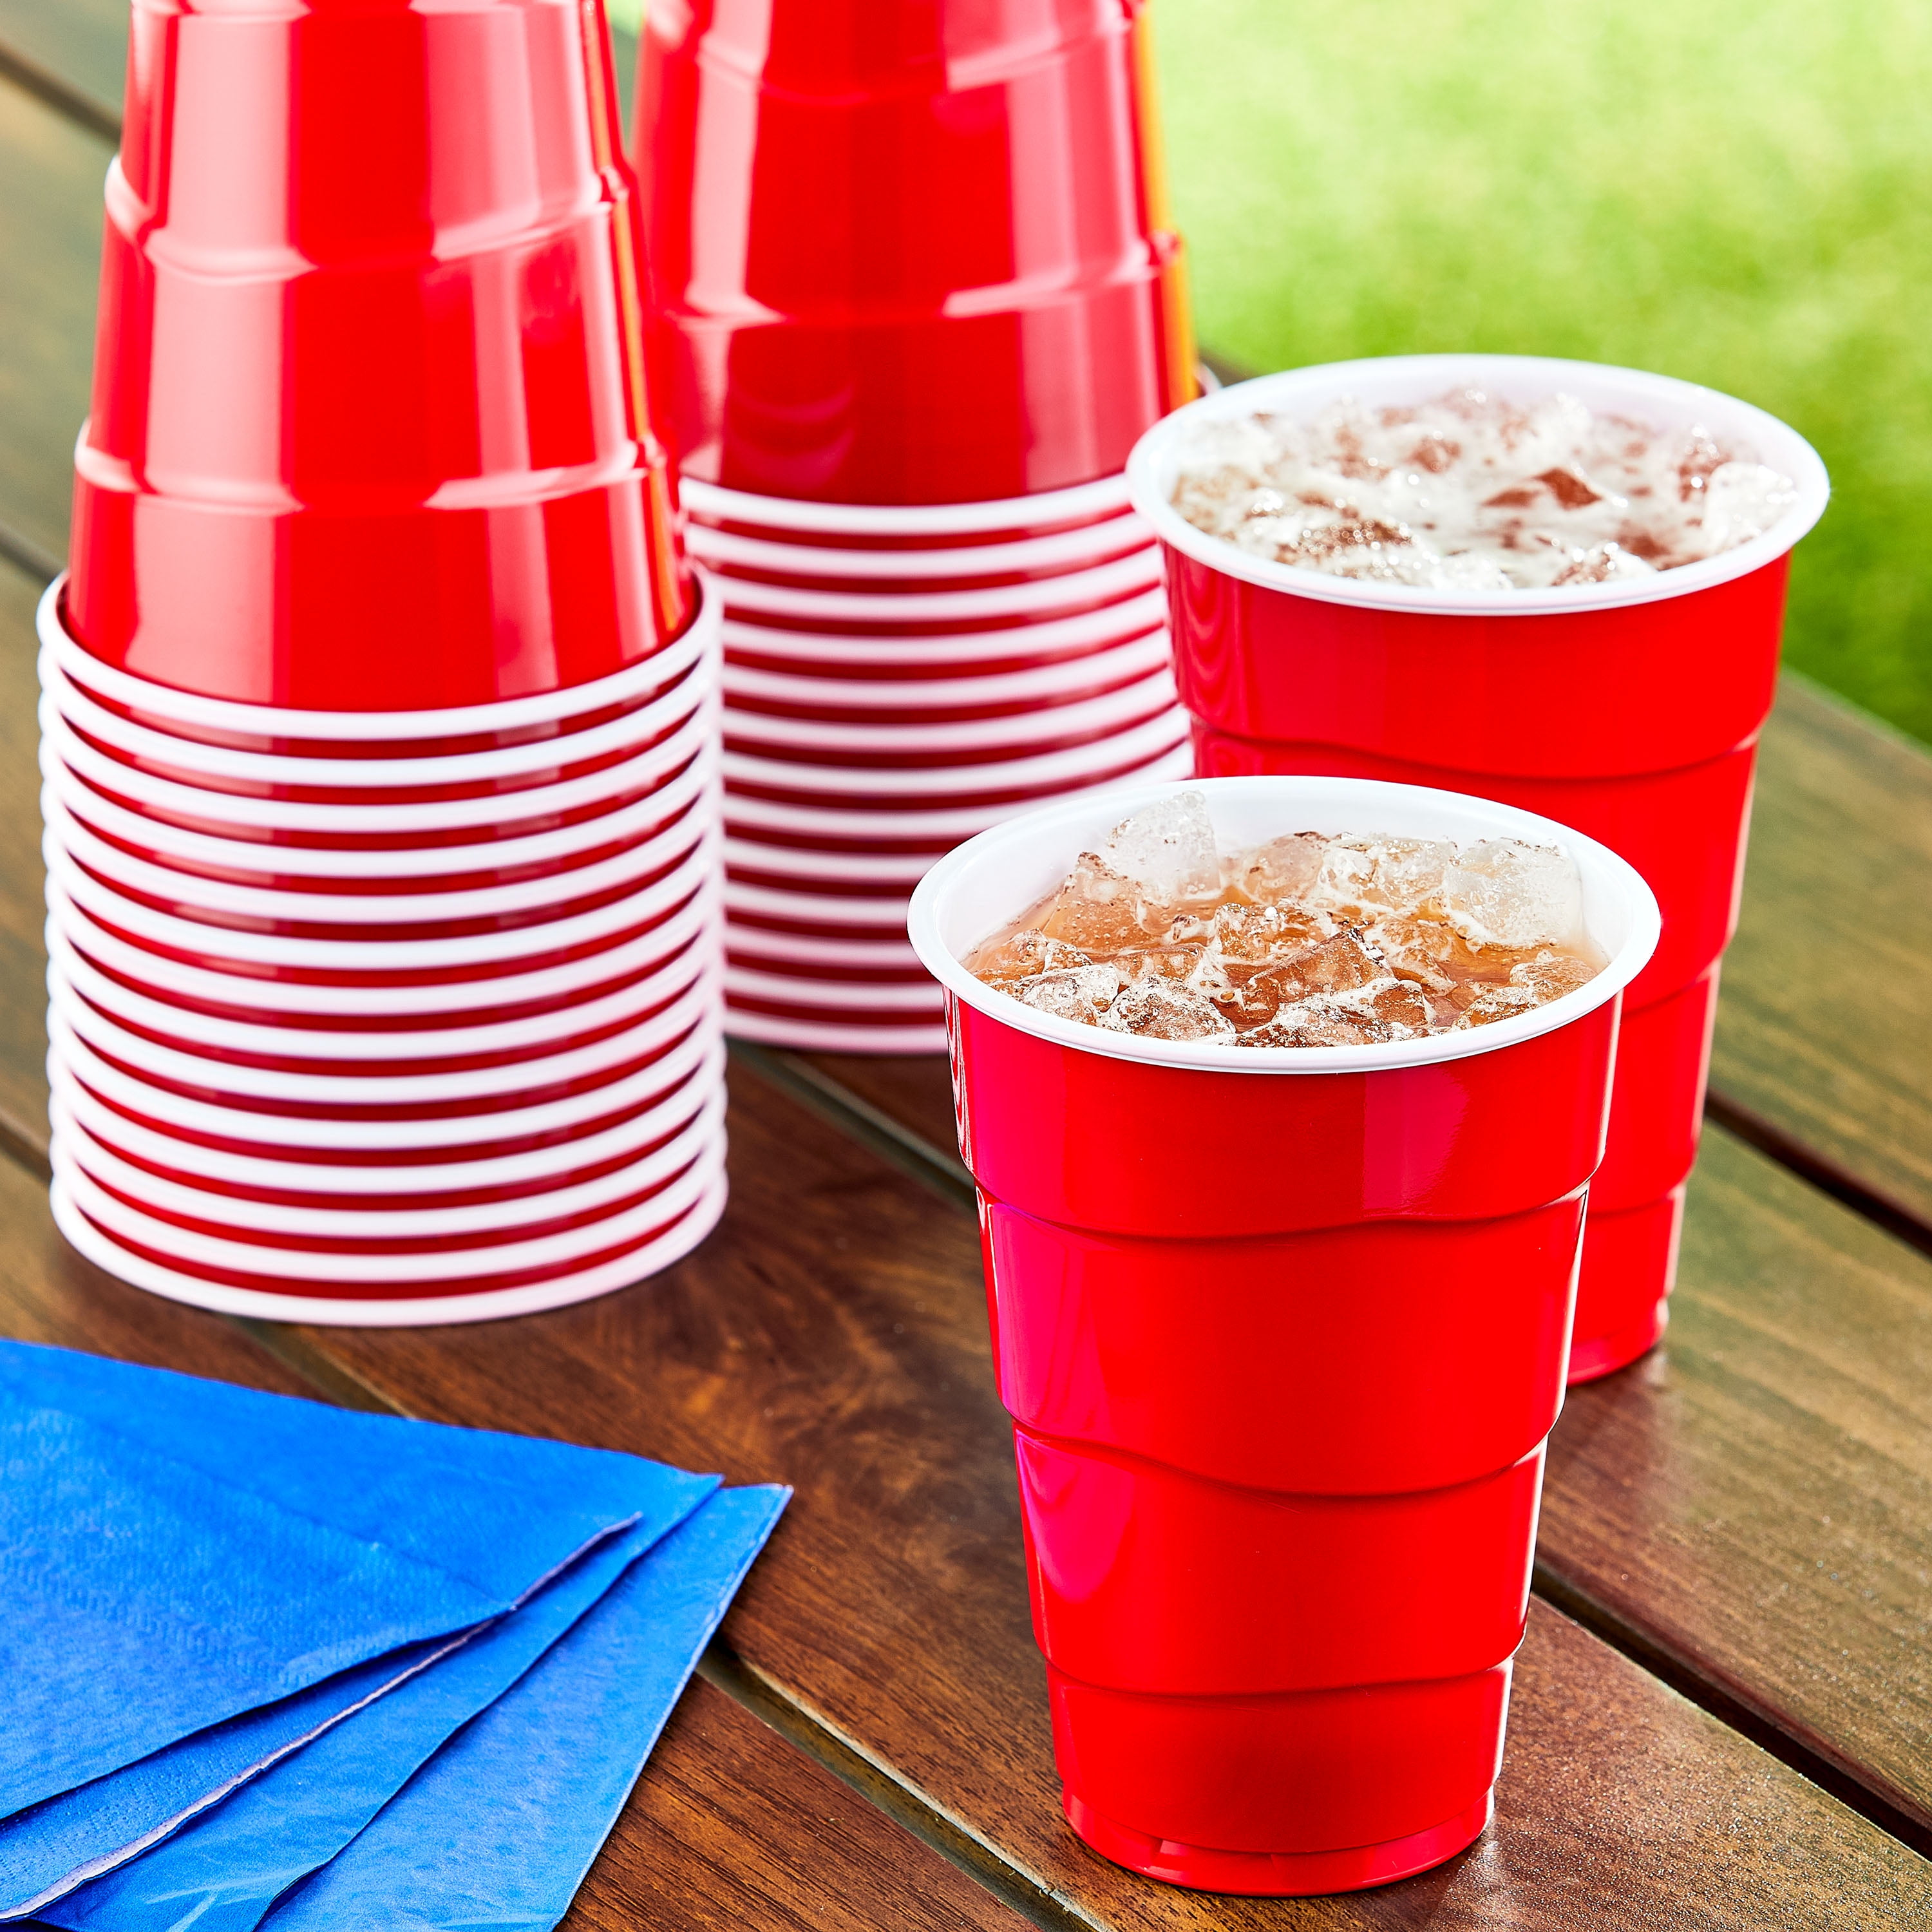 Our favorite ubiquitous red plastic cup gets a seriously stylish upgrade.